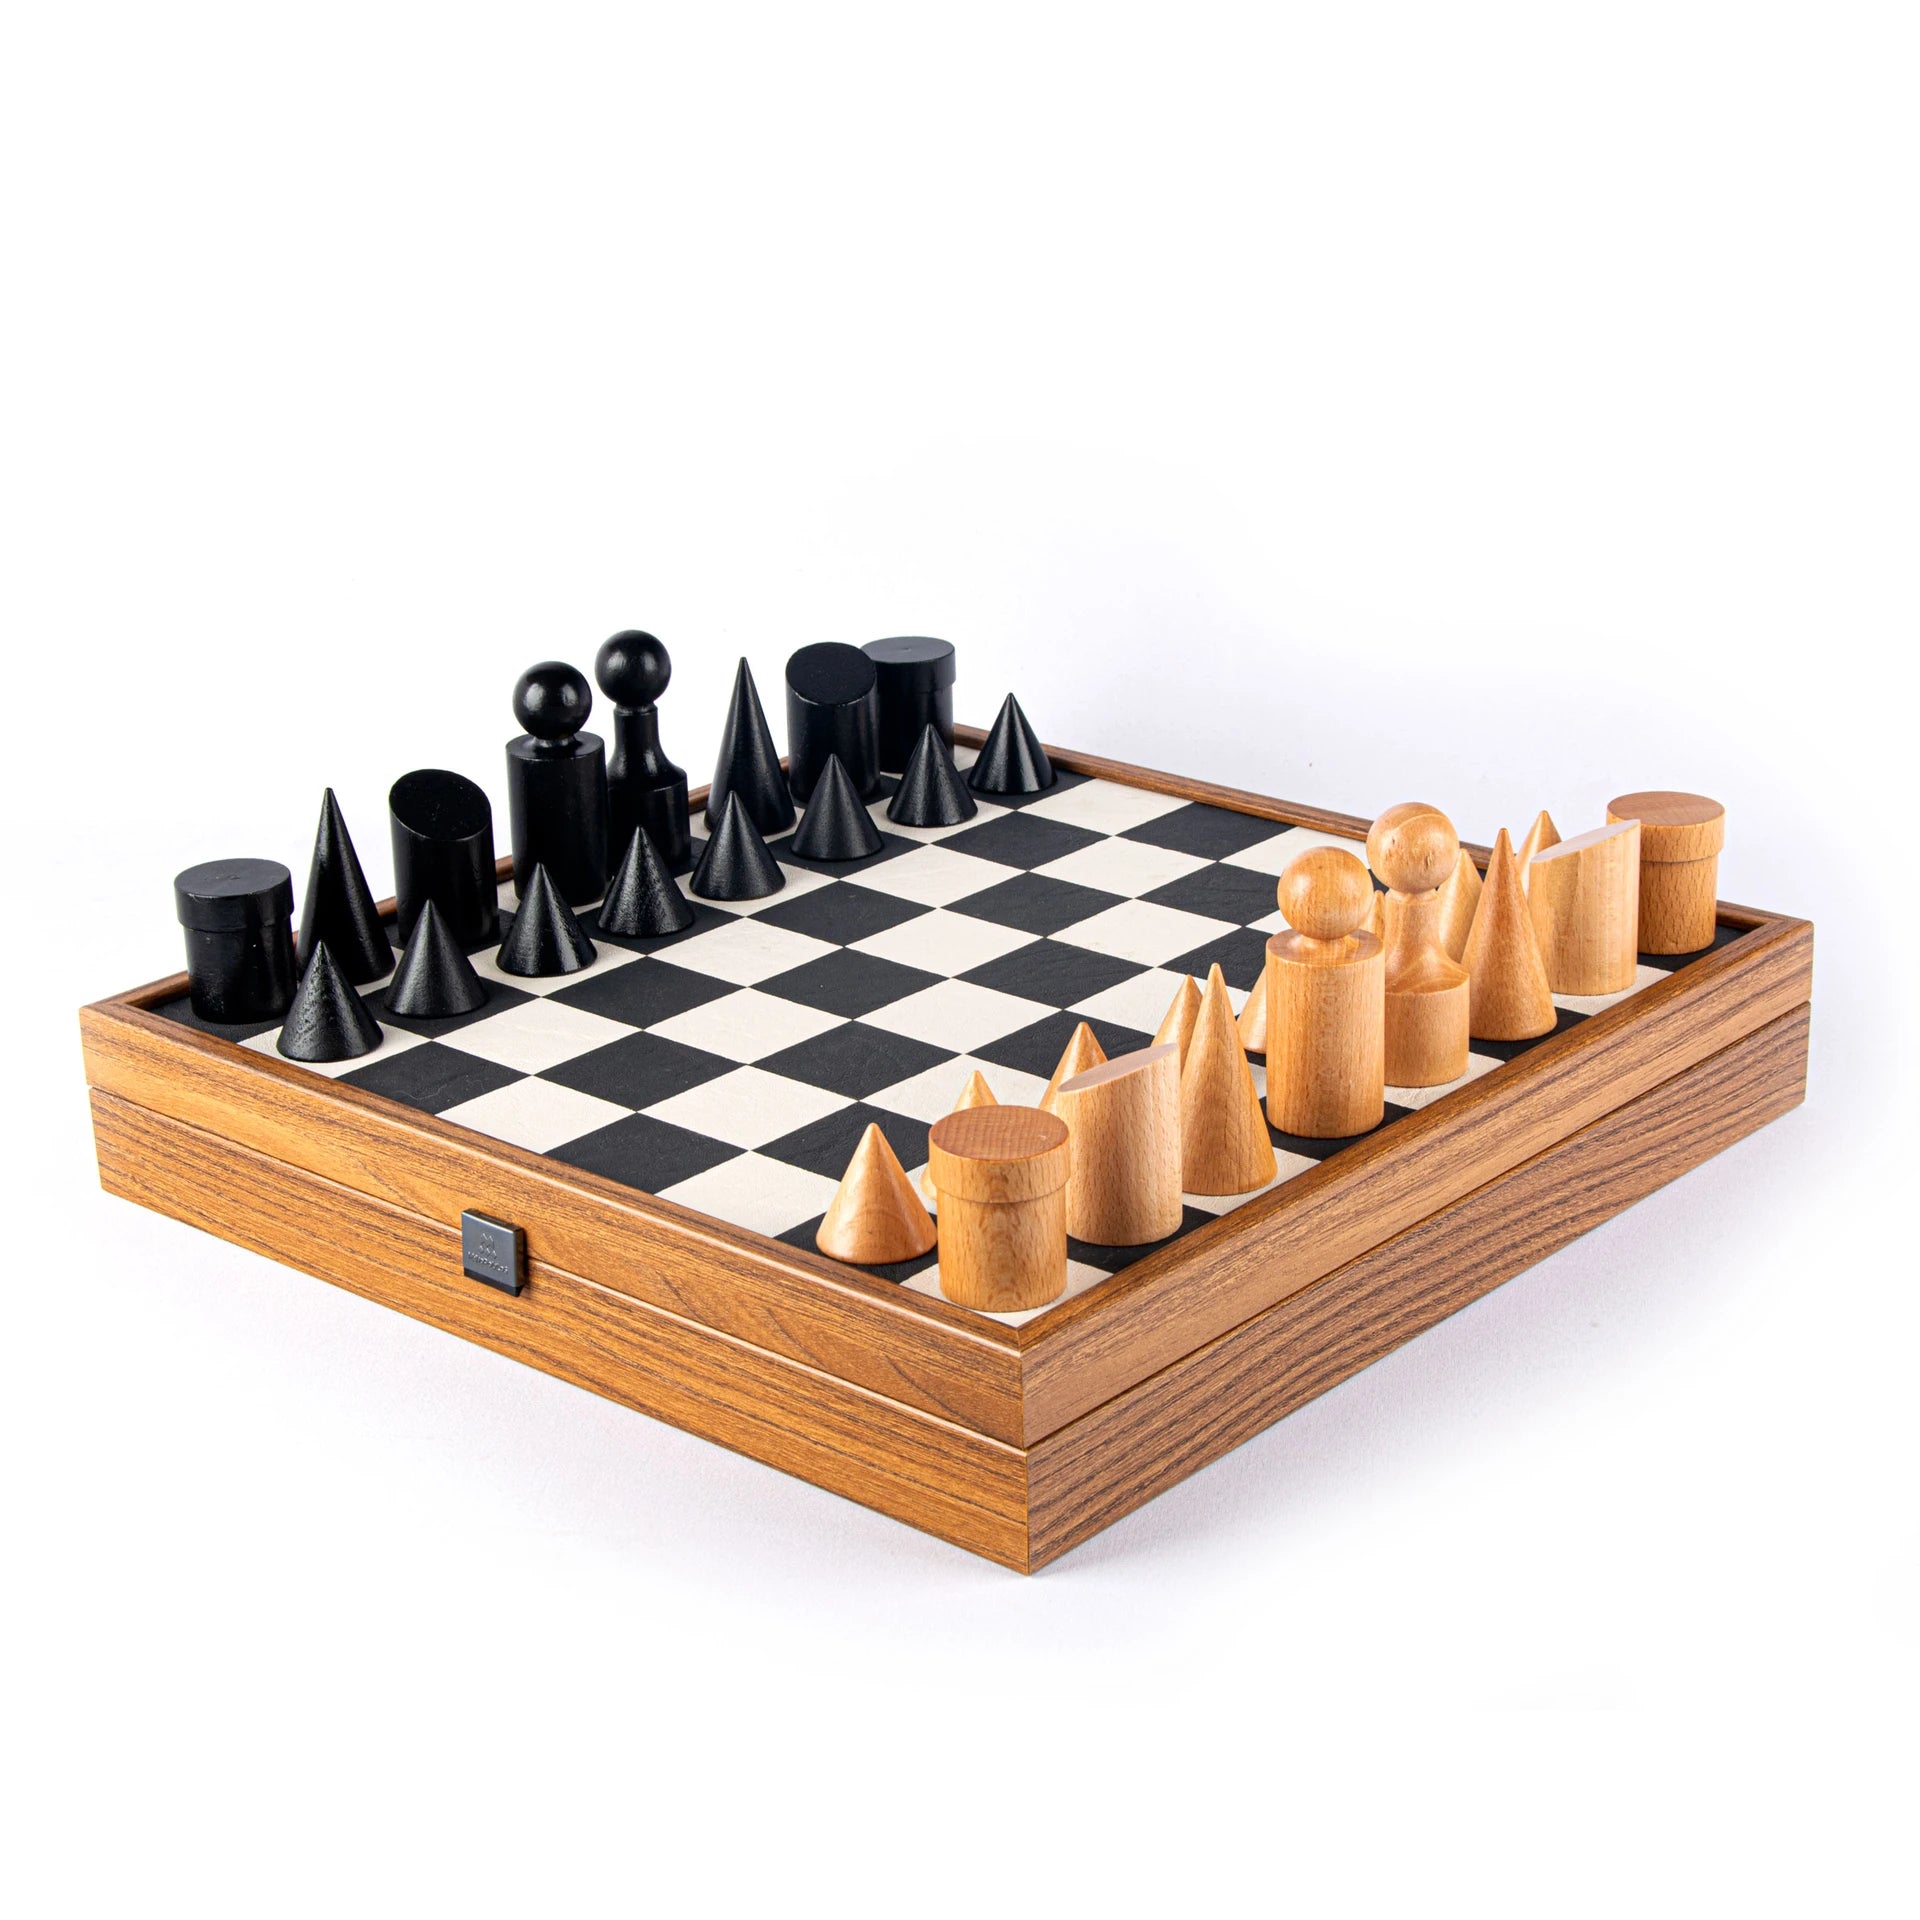 Olive wood chess game, handmade rustic style including figures